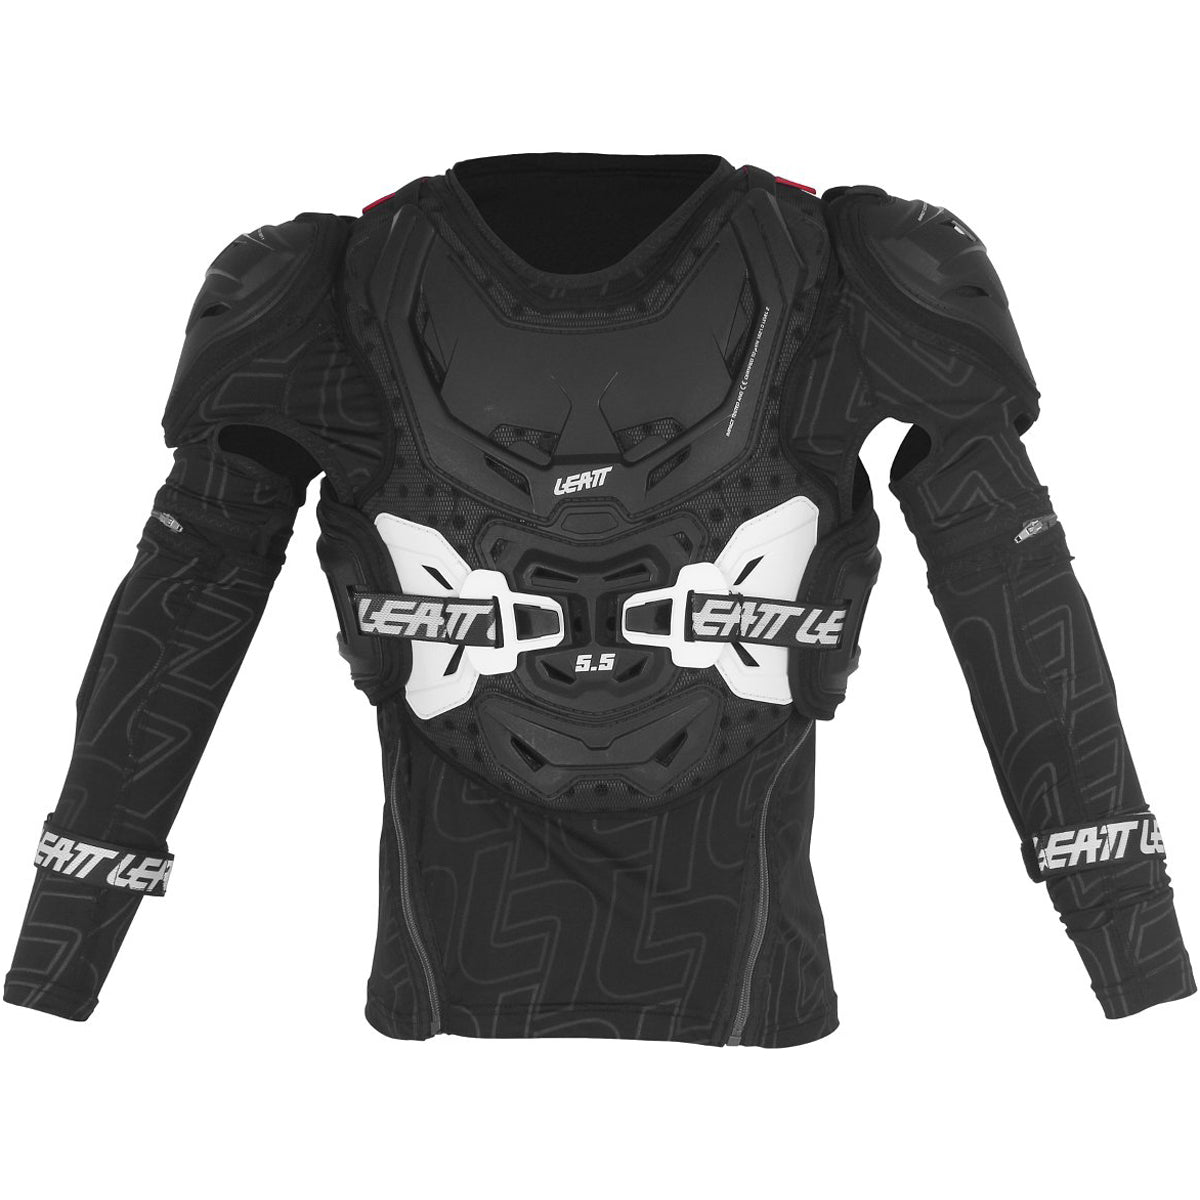 Leatt 5.5 Protector Youth Off-Road Body Armor-5015400650